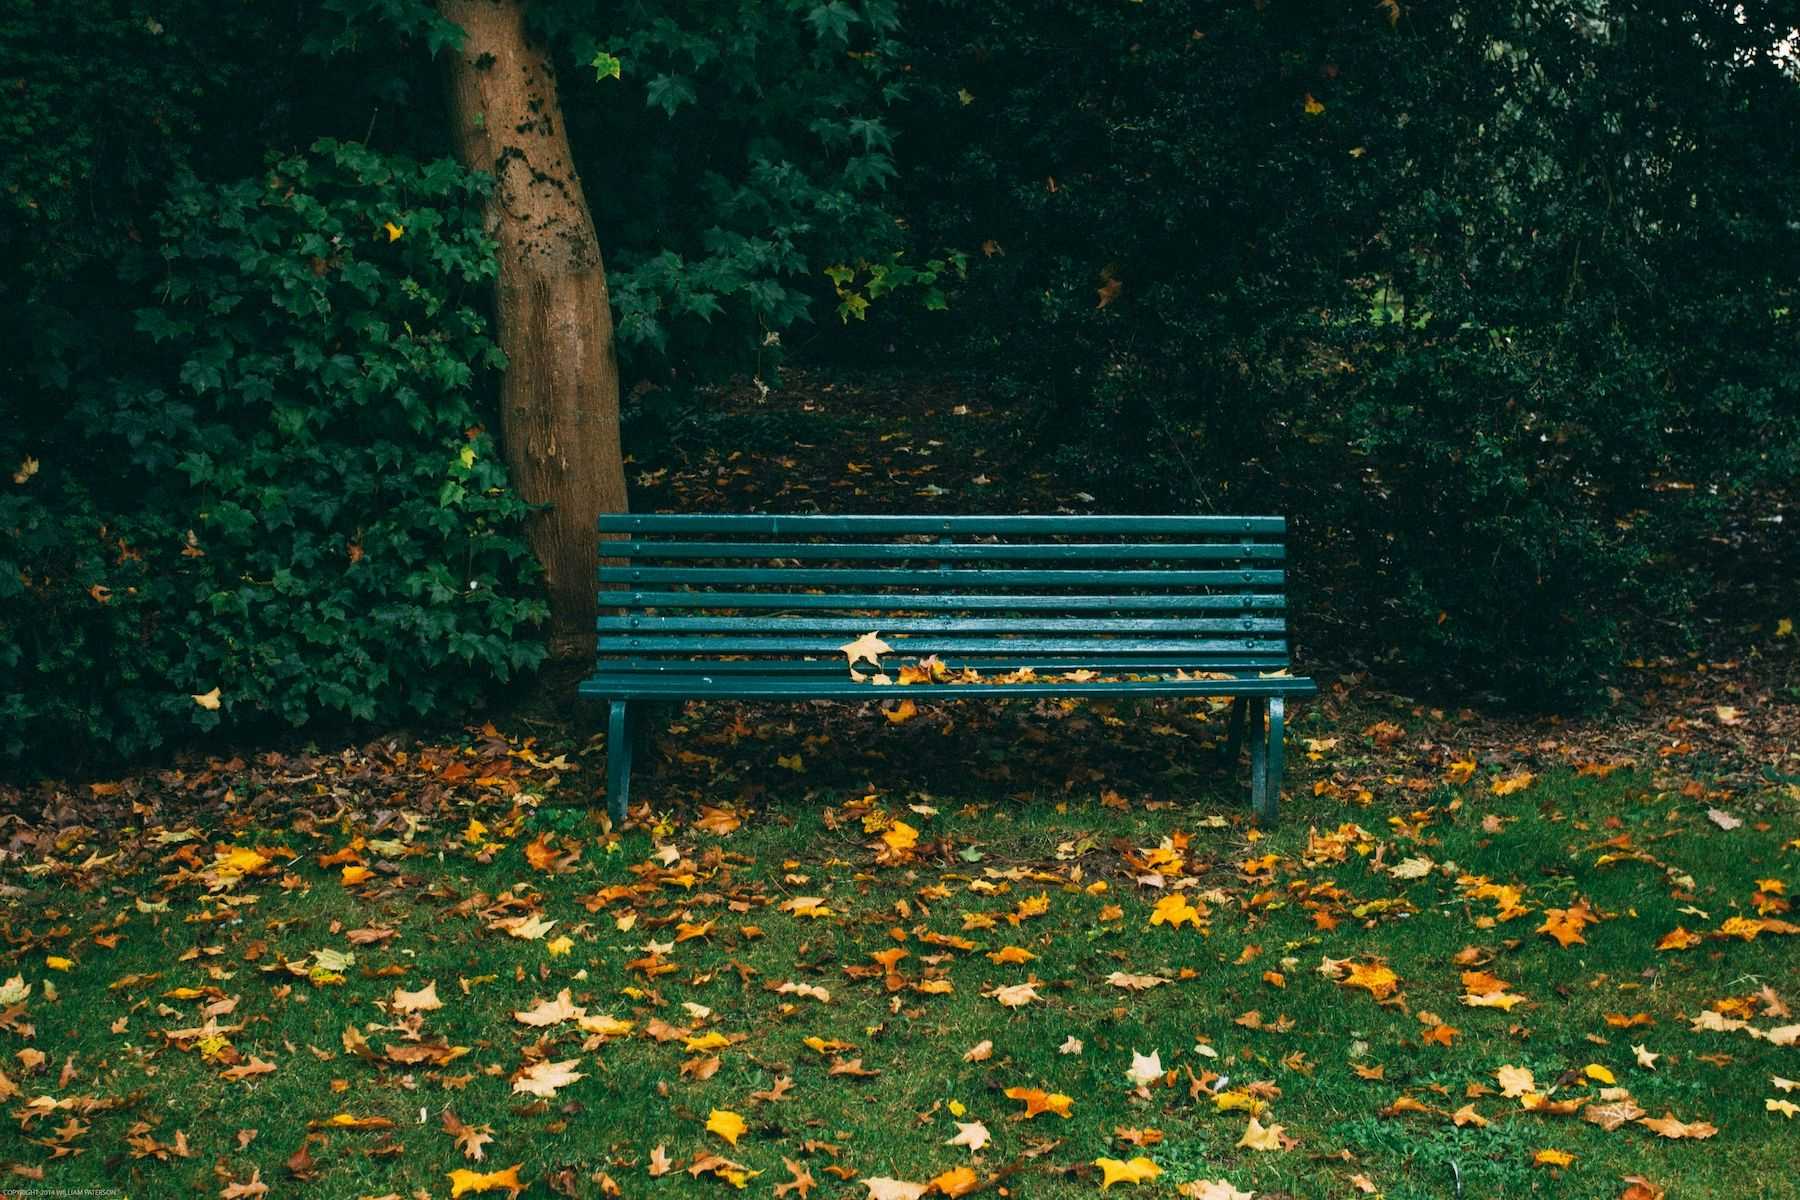 Green park bench in a park